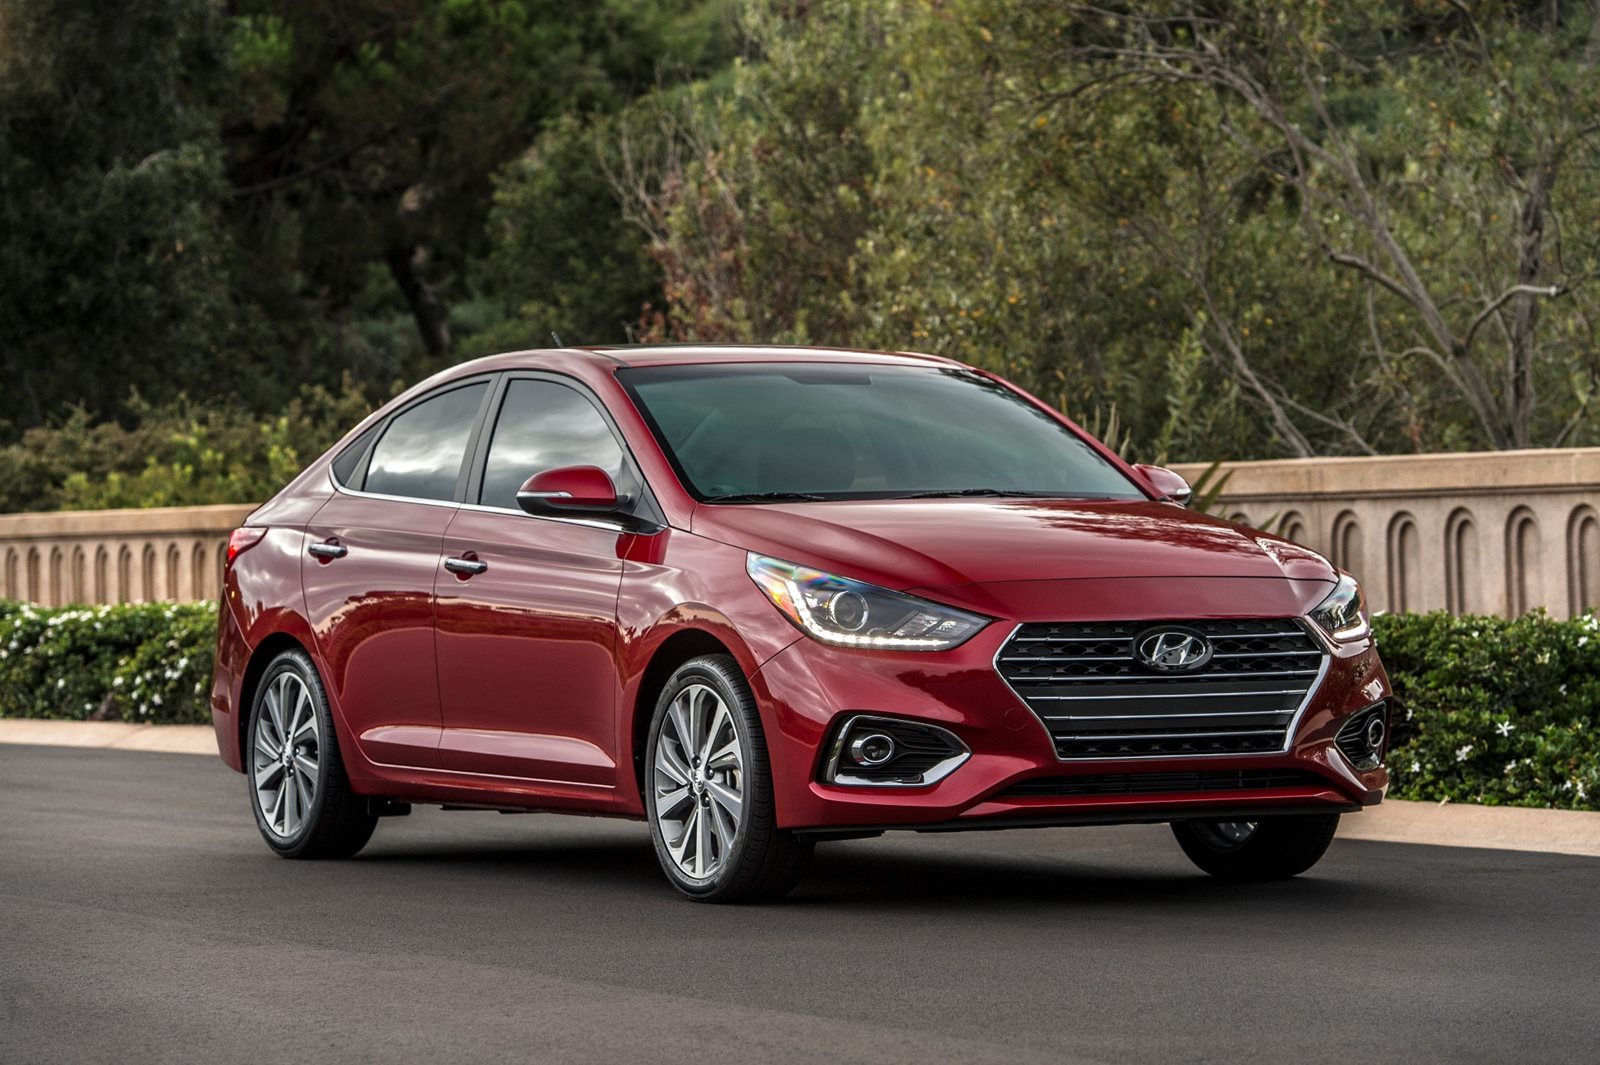 2014 Hyundai Accent Review